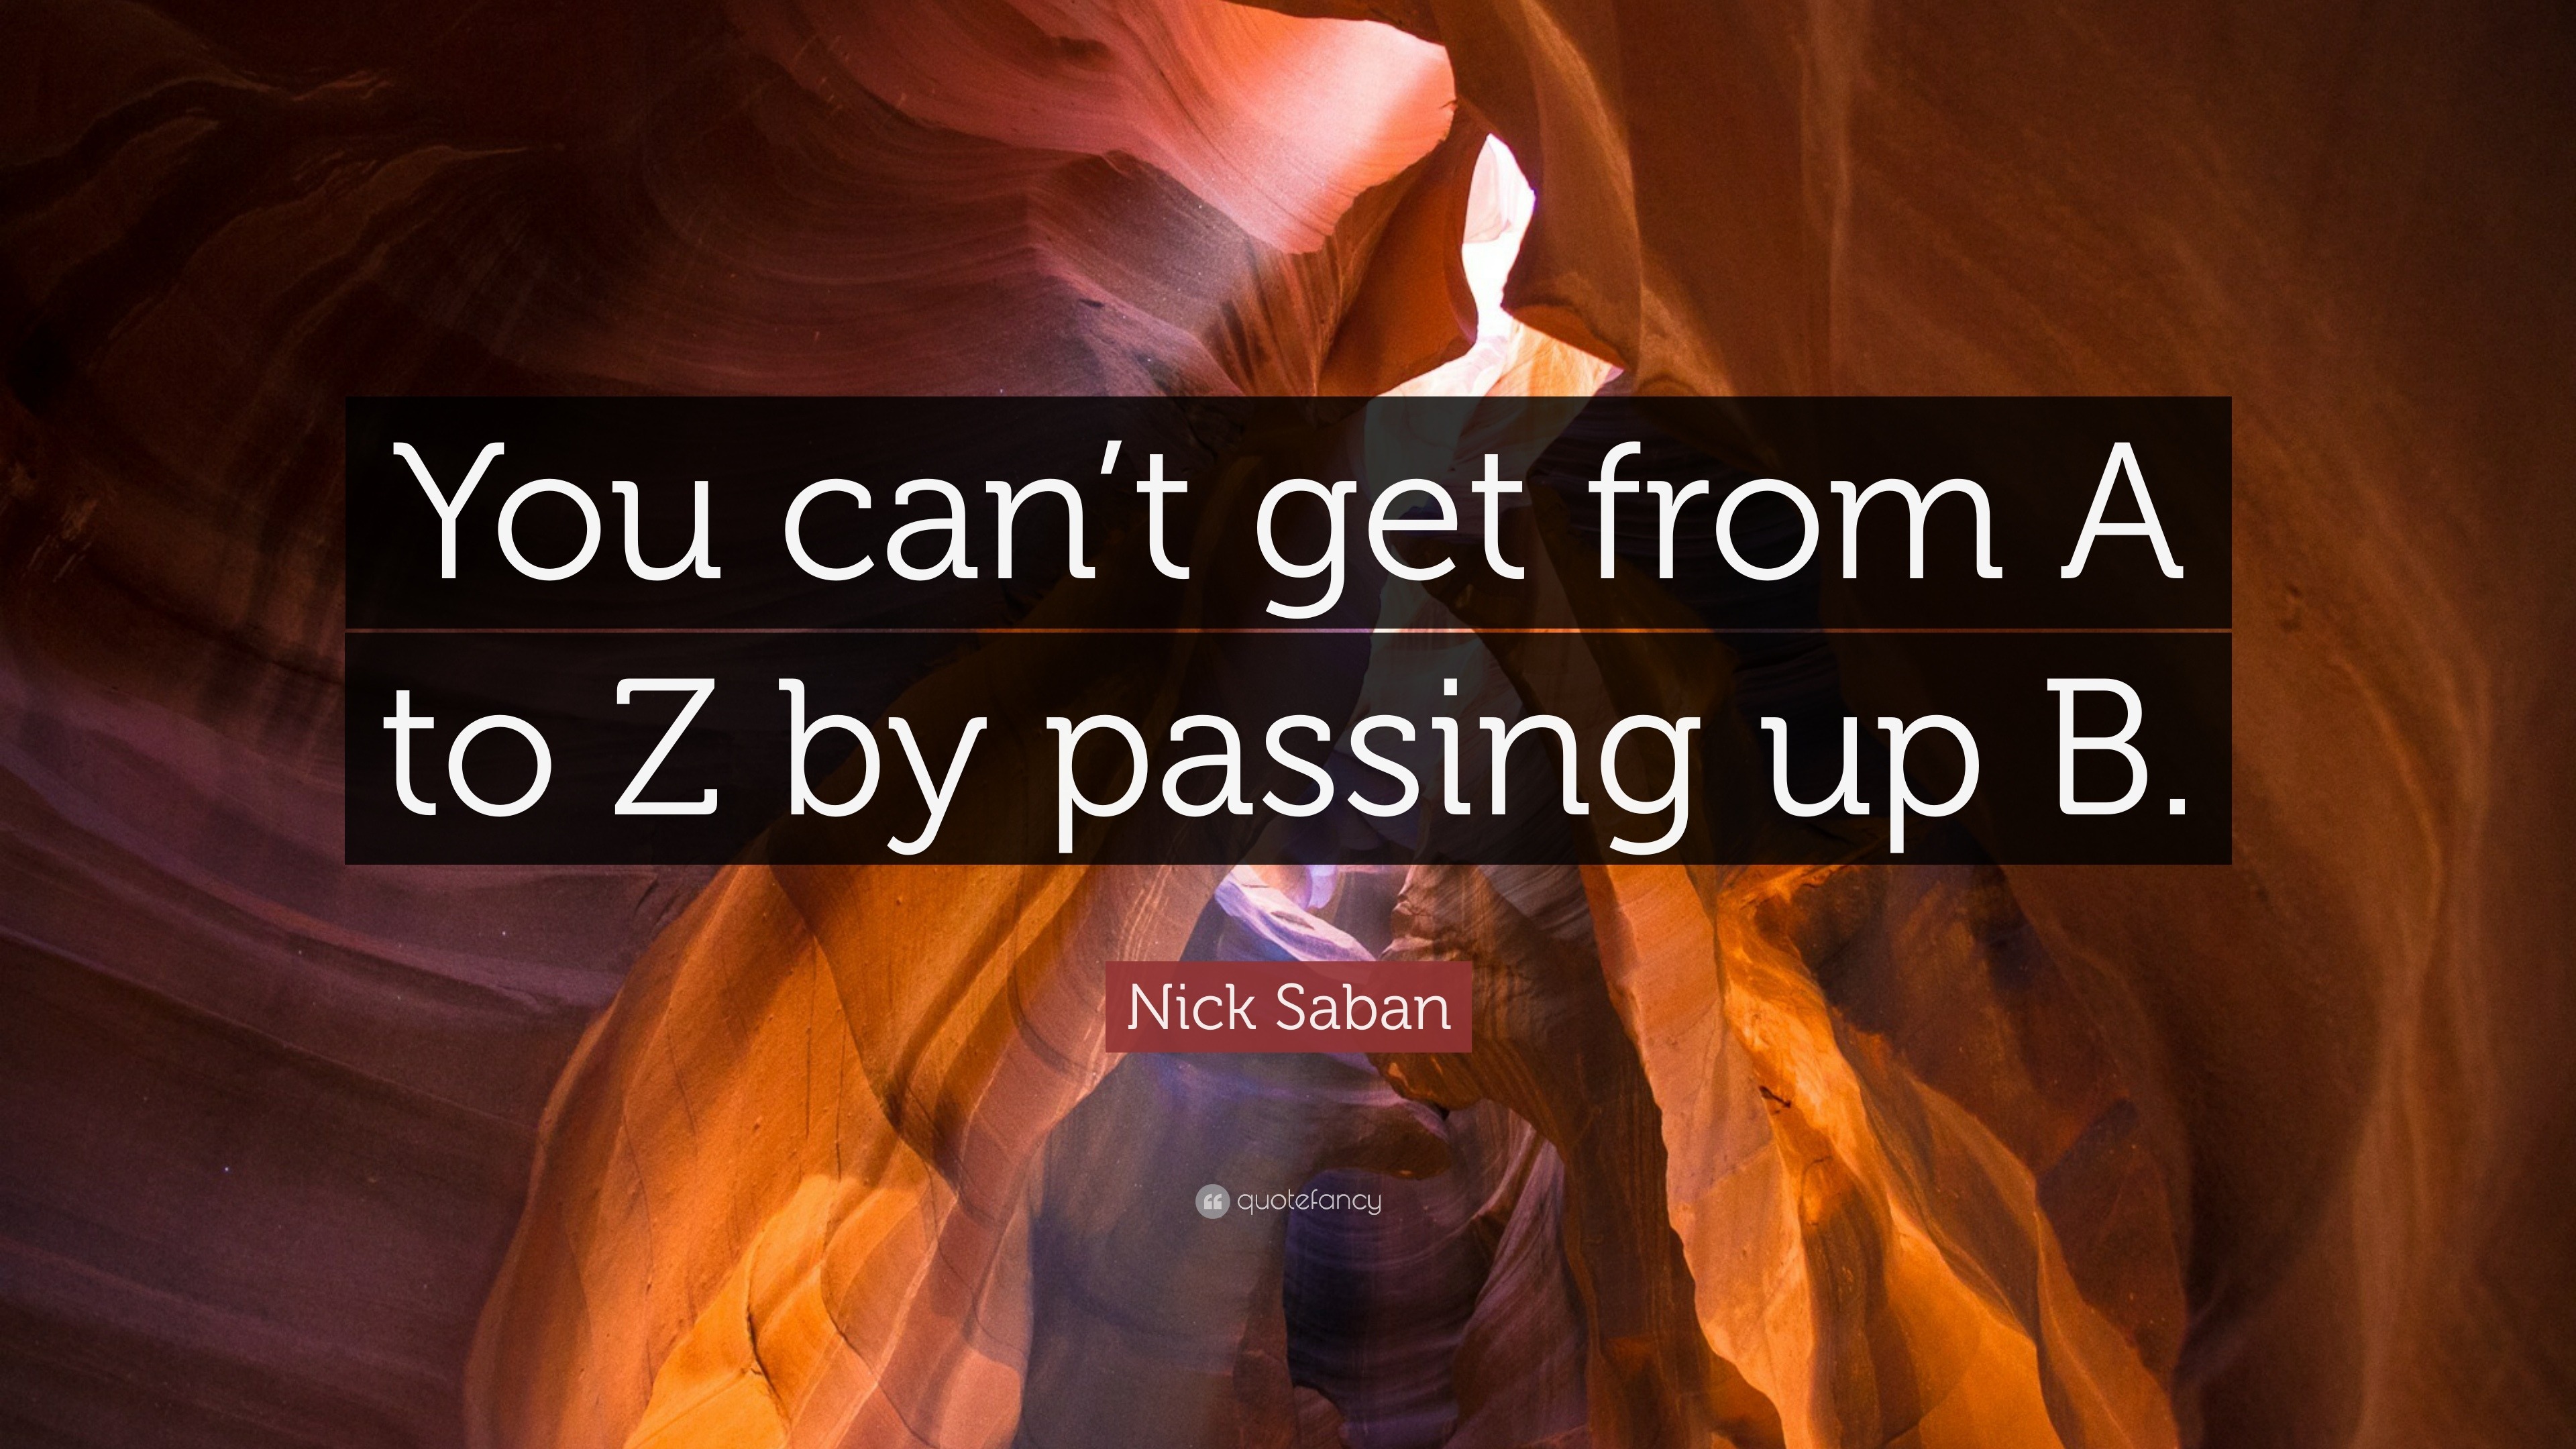 Nick Saban Quote: “You can't get from A to Z by passing up B.”